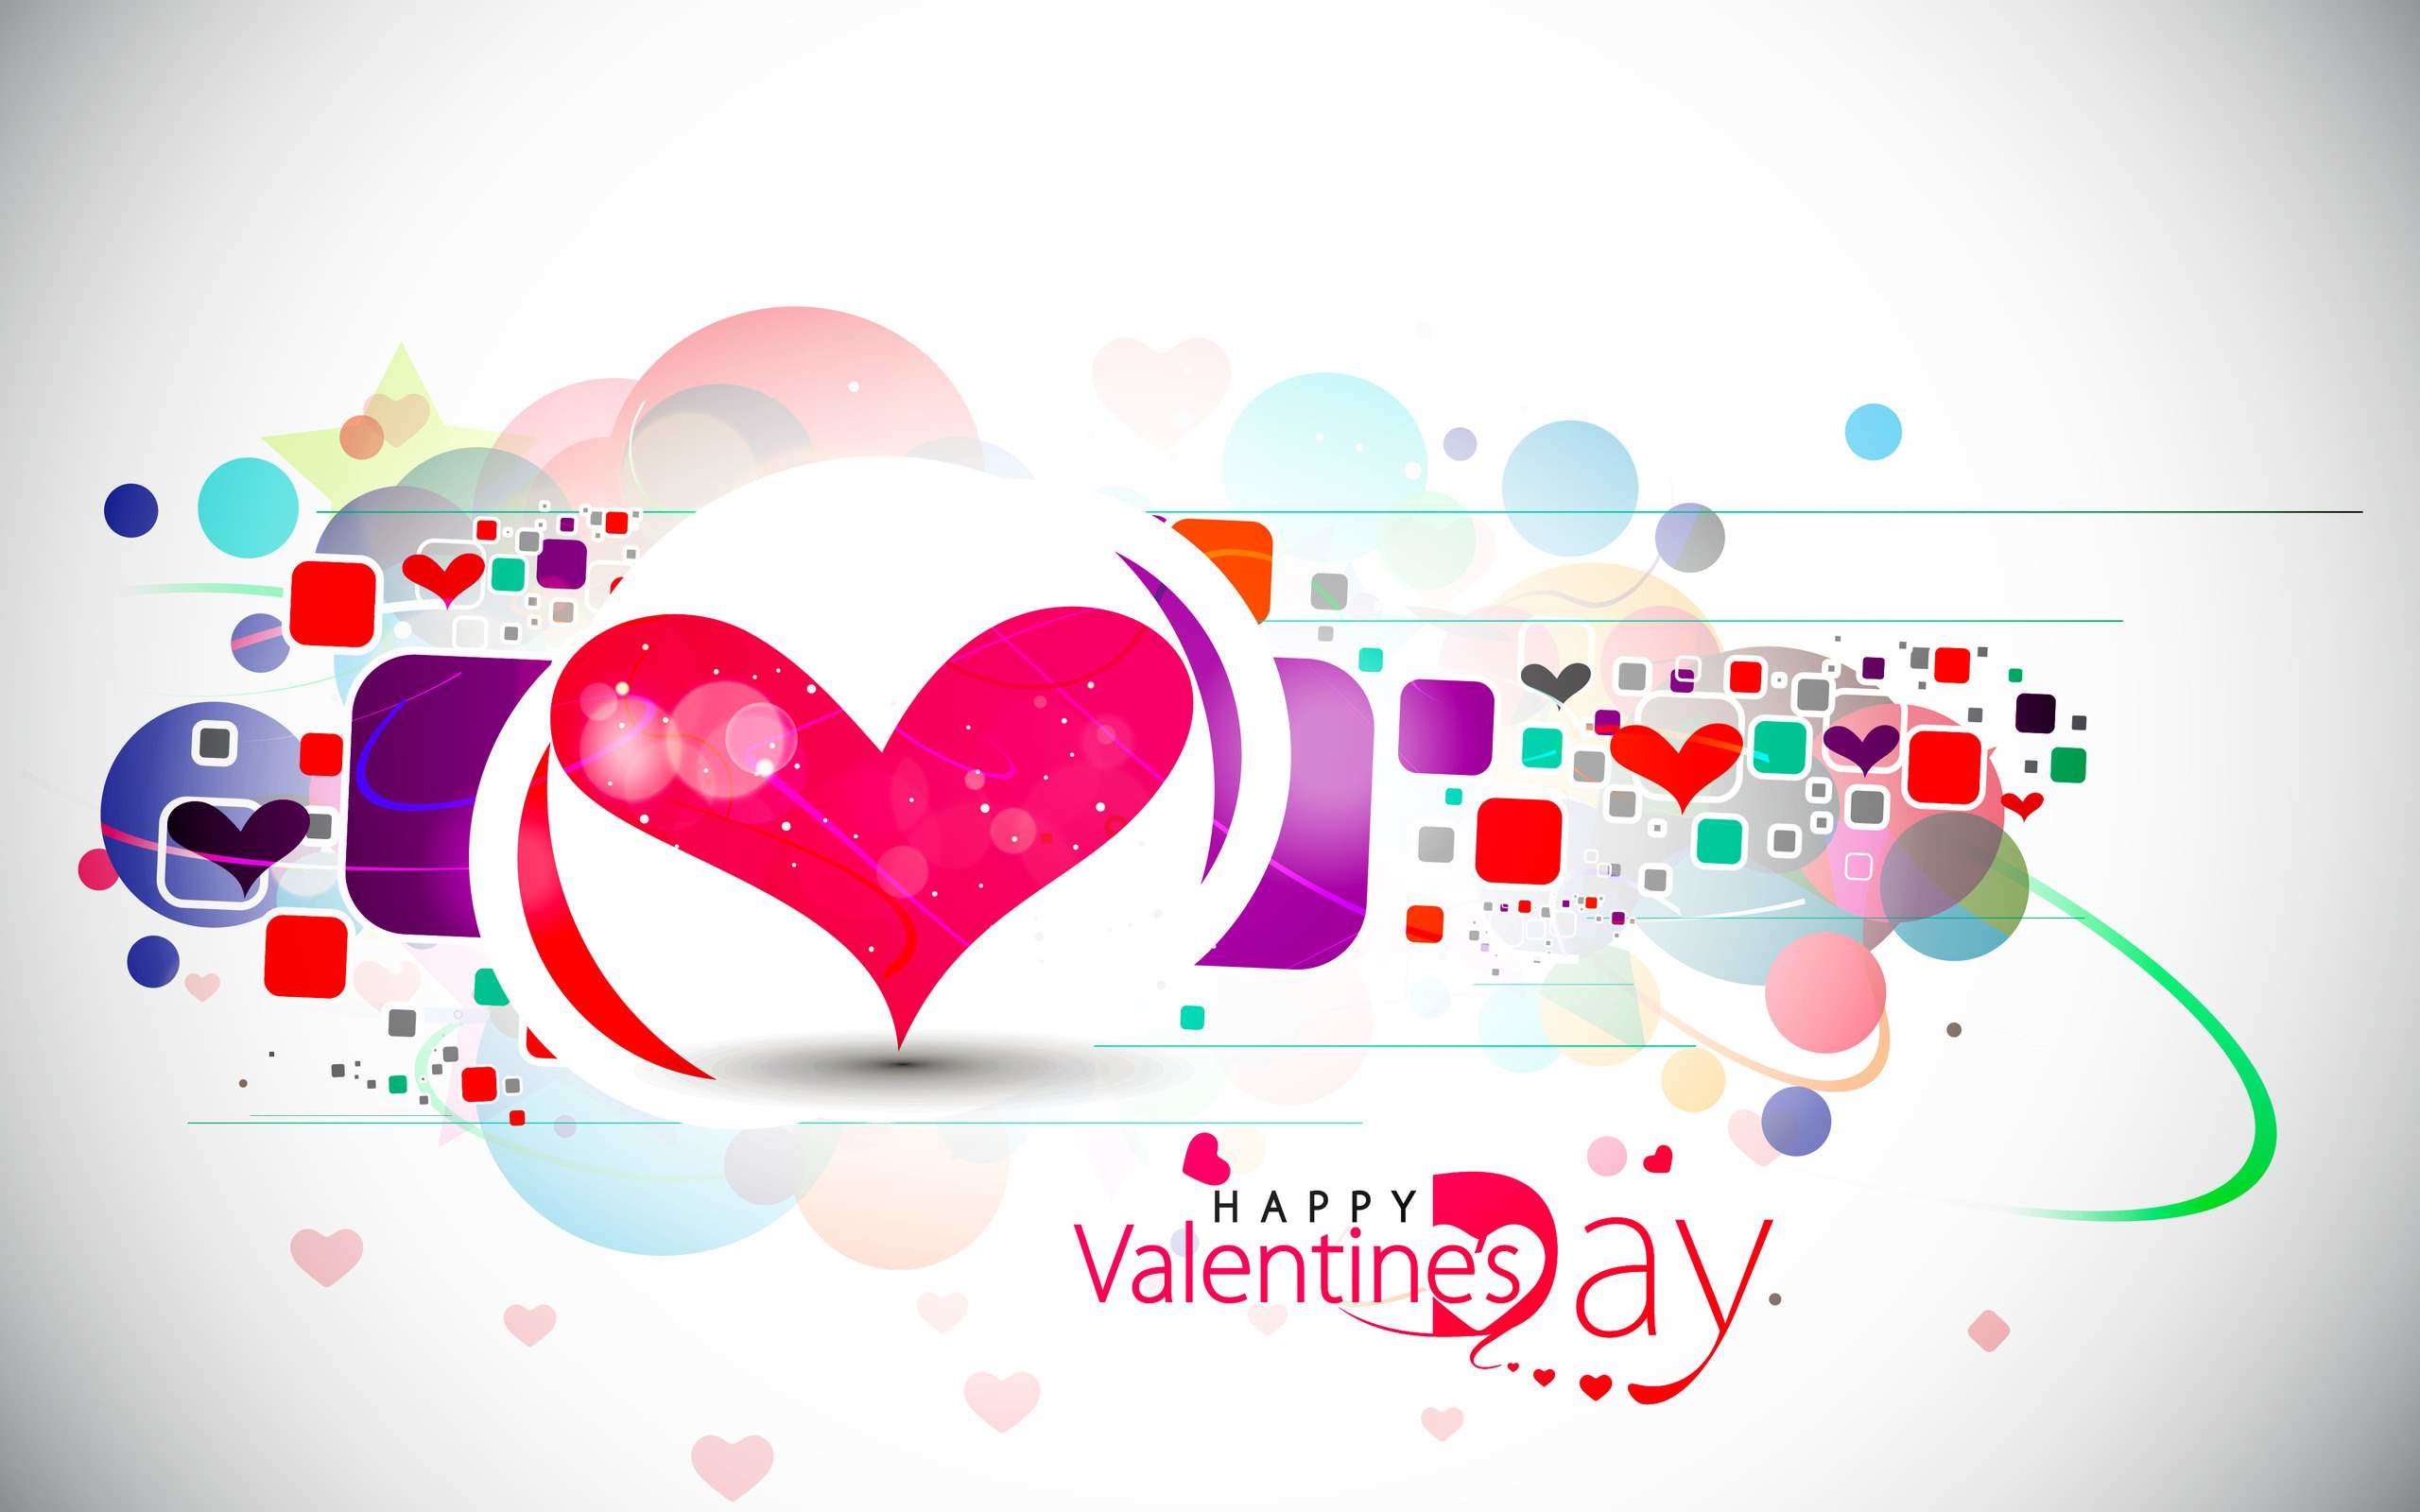 HD Valentines Day Wallpapers 2017